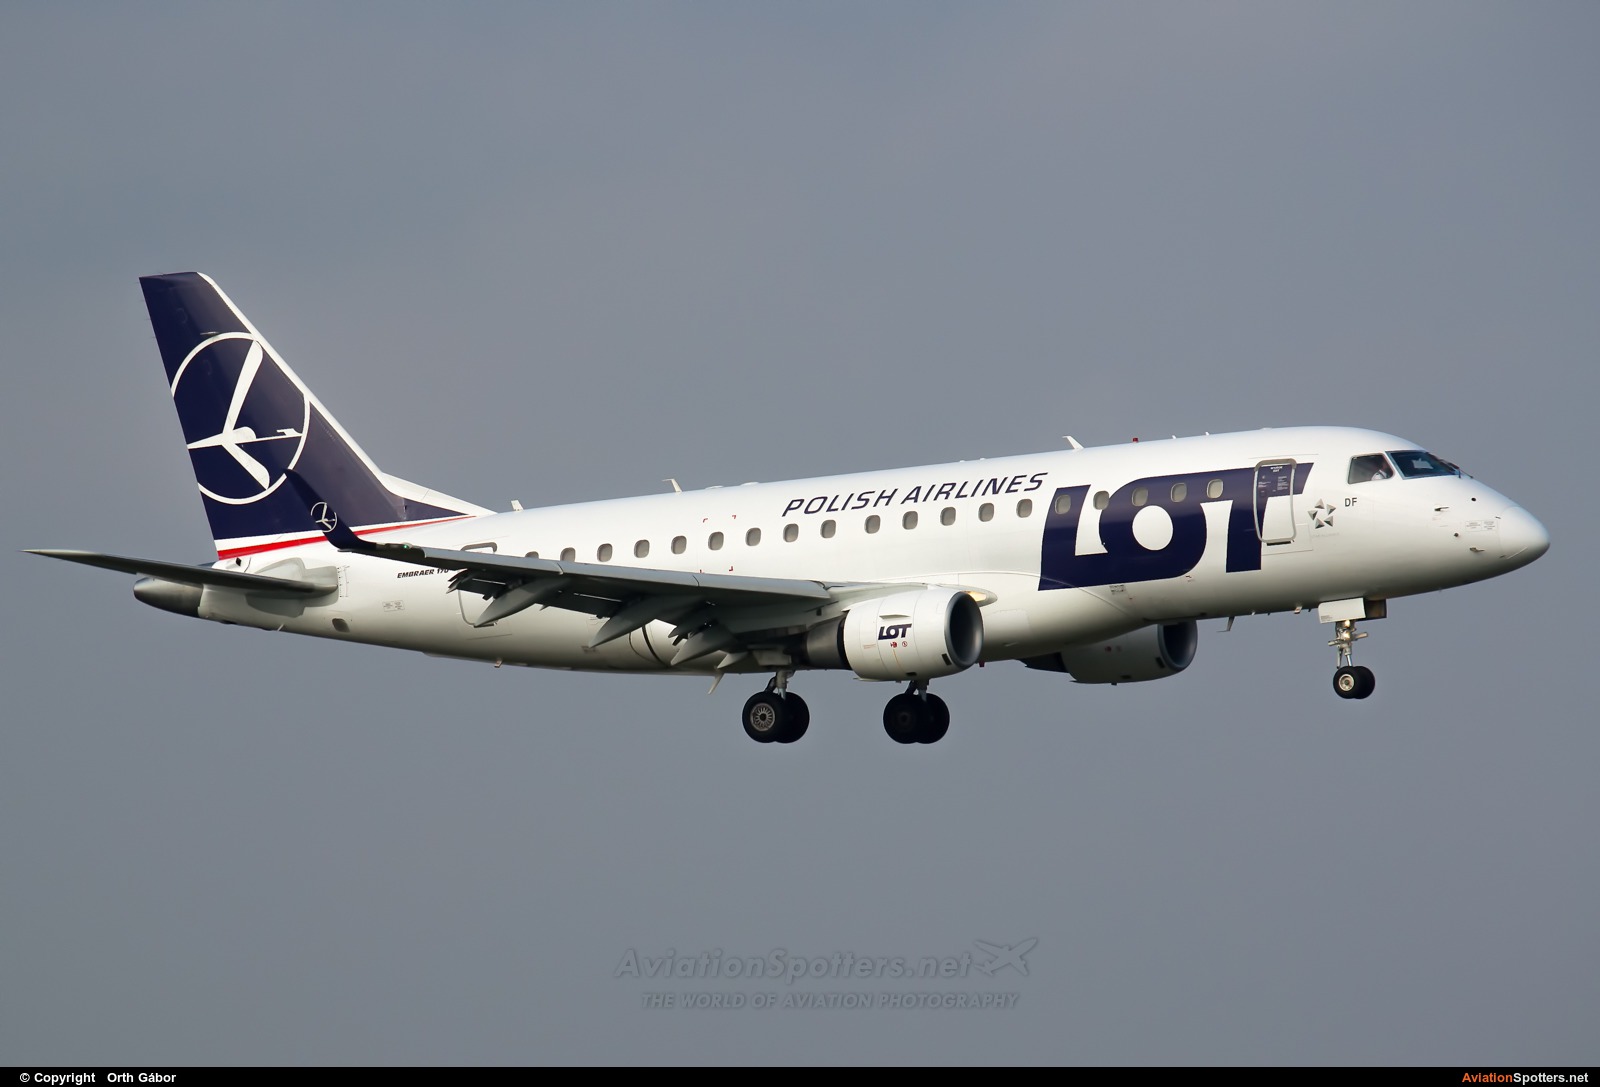 LOT - Polish Airlines  -  170  (SP-LDF) By Orth Gábor (Roodkop)